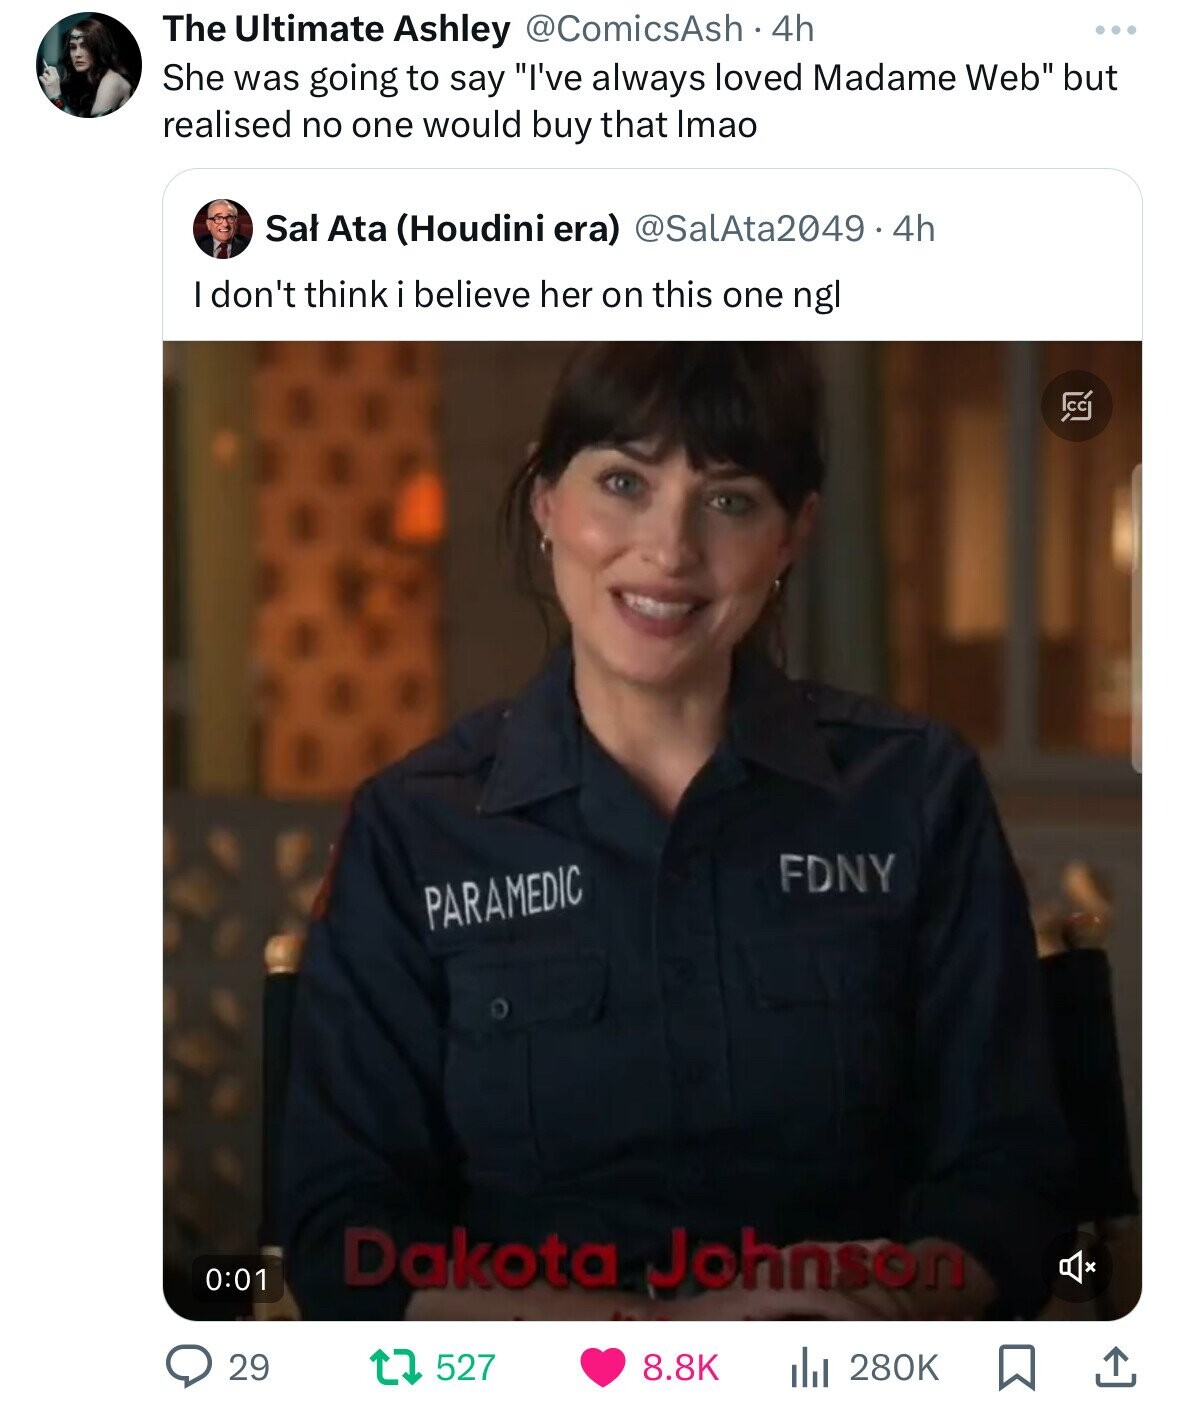 photo caption - The Ultimate Ashley . 4h She was going to say "I've always loved Madame Web" but realised no one would buy that Imao Sal Ata Houdini era .4h I don't think i believe her on this one ngl 29 Paramedic Fdny Dakota Johnson 527 a ... 1